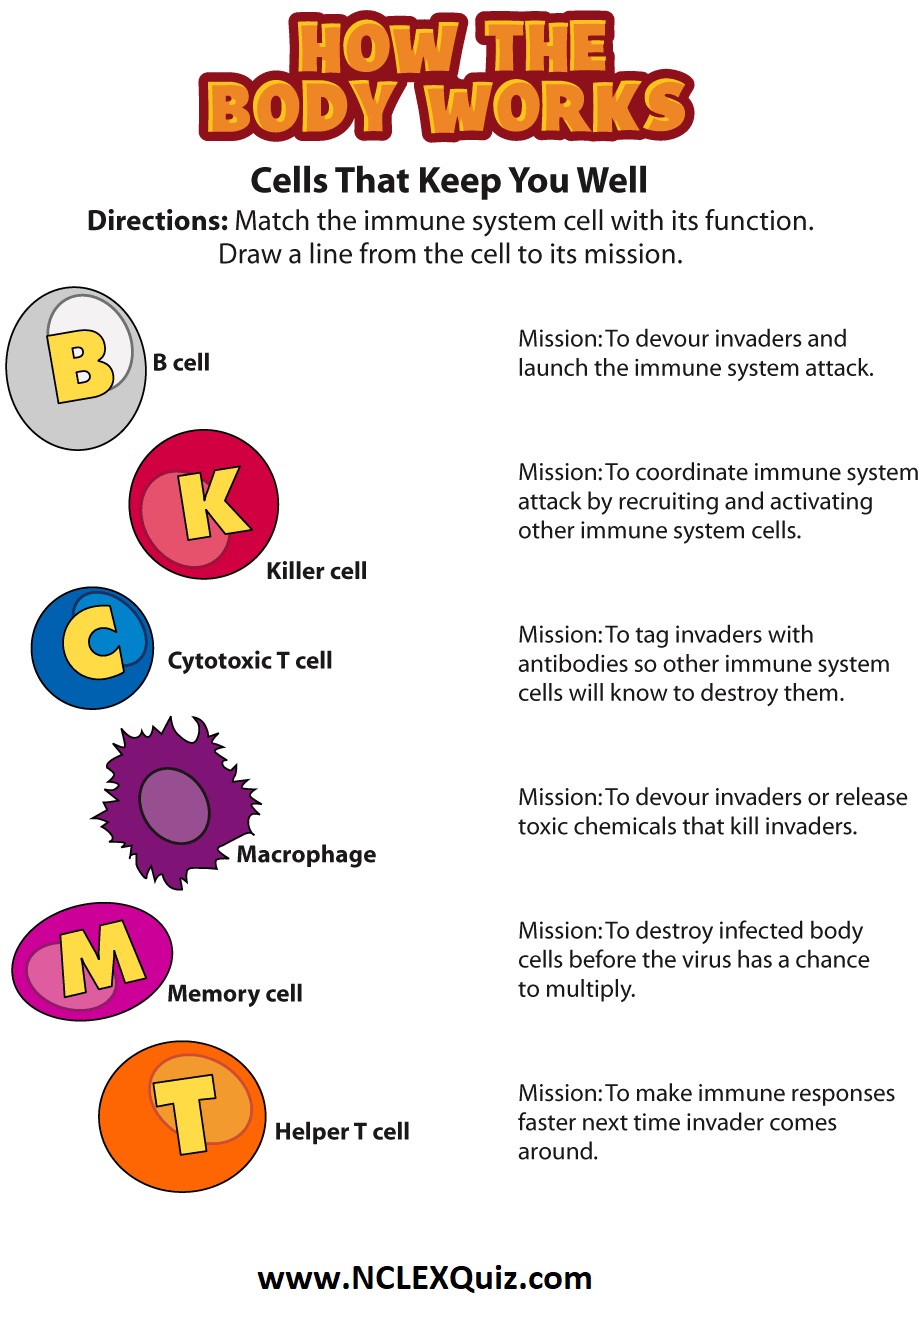 Immune System Overview for Nursing Students (Structure and Function) 